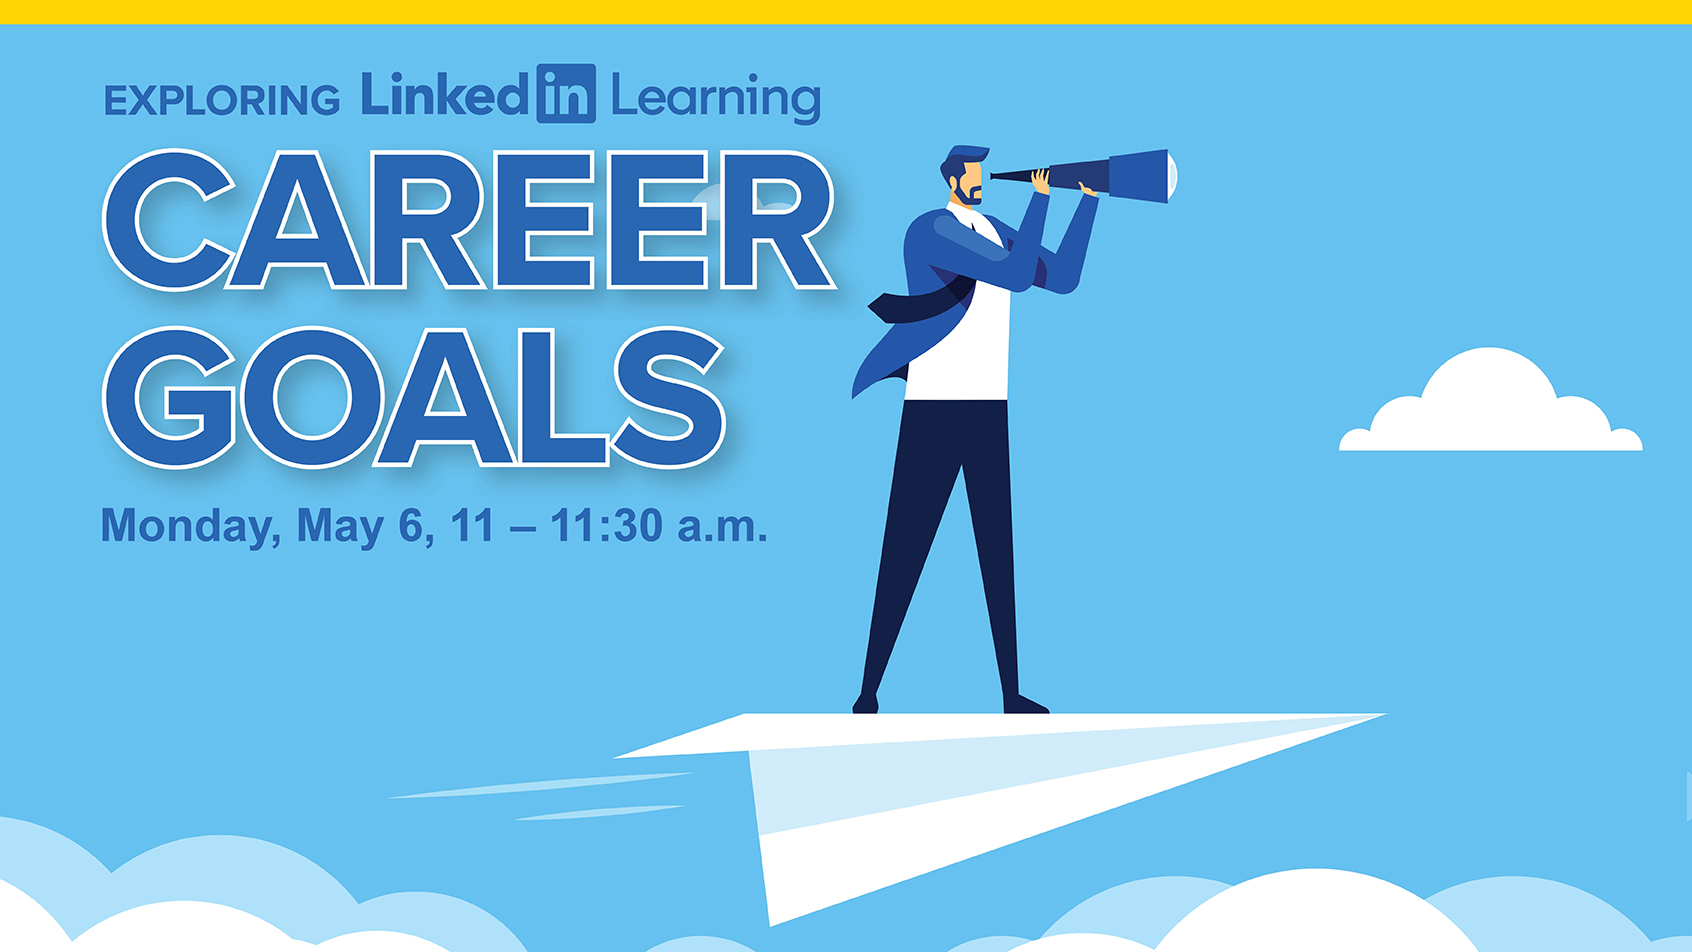 Explore Linkedin Learning: Career Goals - Monday, May 6, 11:00-11:30am